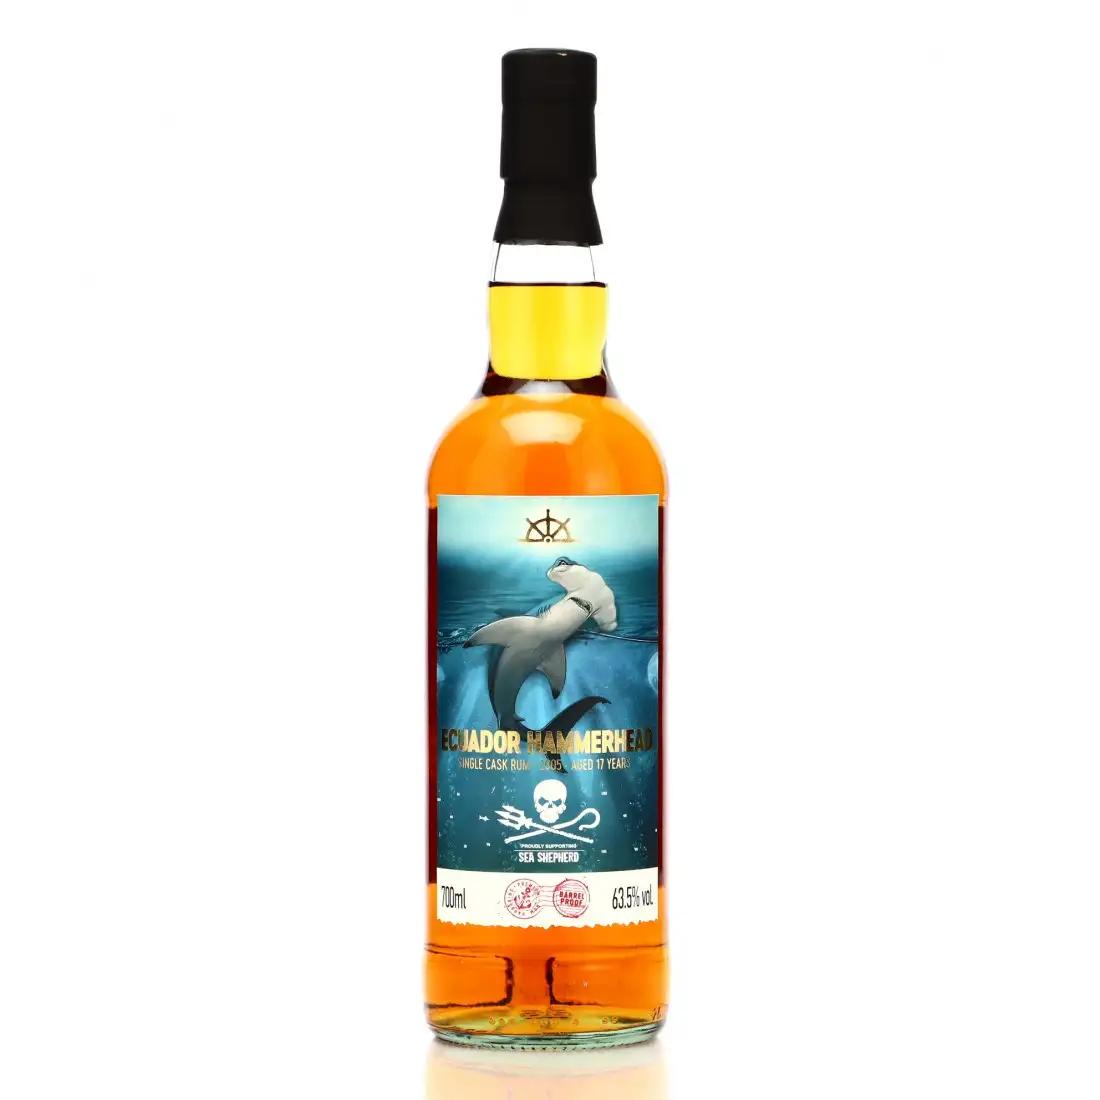 Image of the front of the bottle of the rum Flensburg Rum Company Ecuador Hammerhead - Sea Shepherd